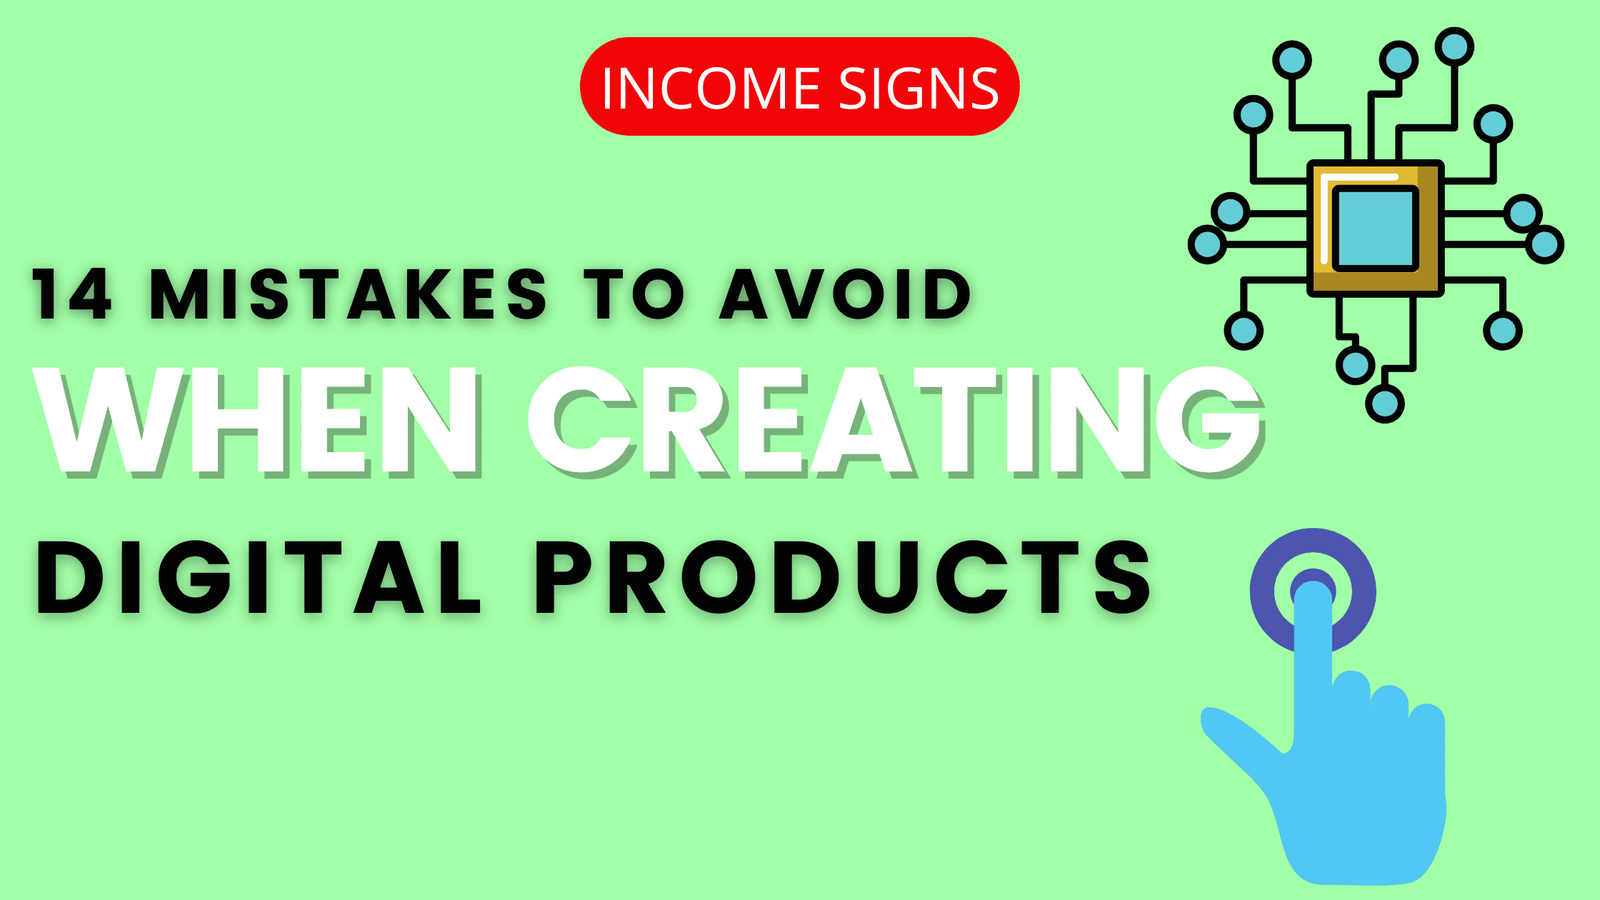 14 Mistakes to Avoid When Creating a Digital Product